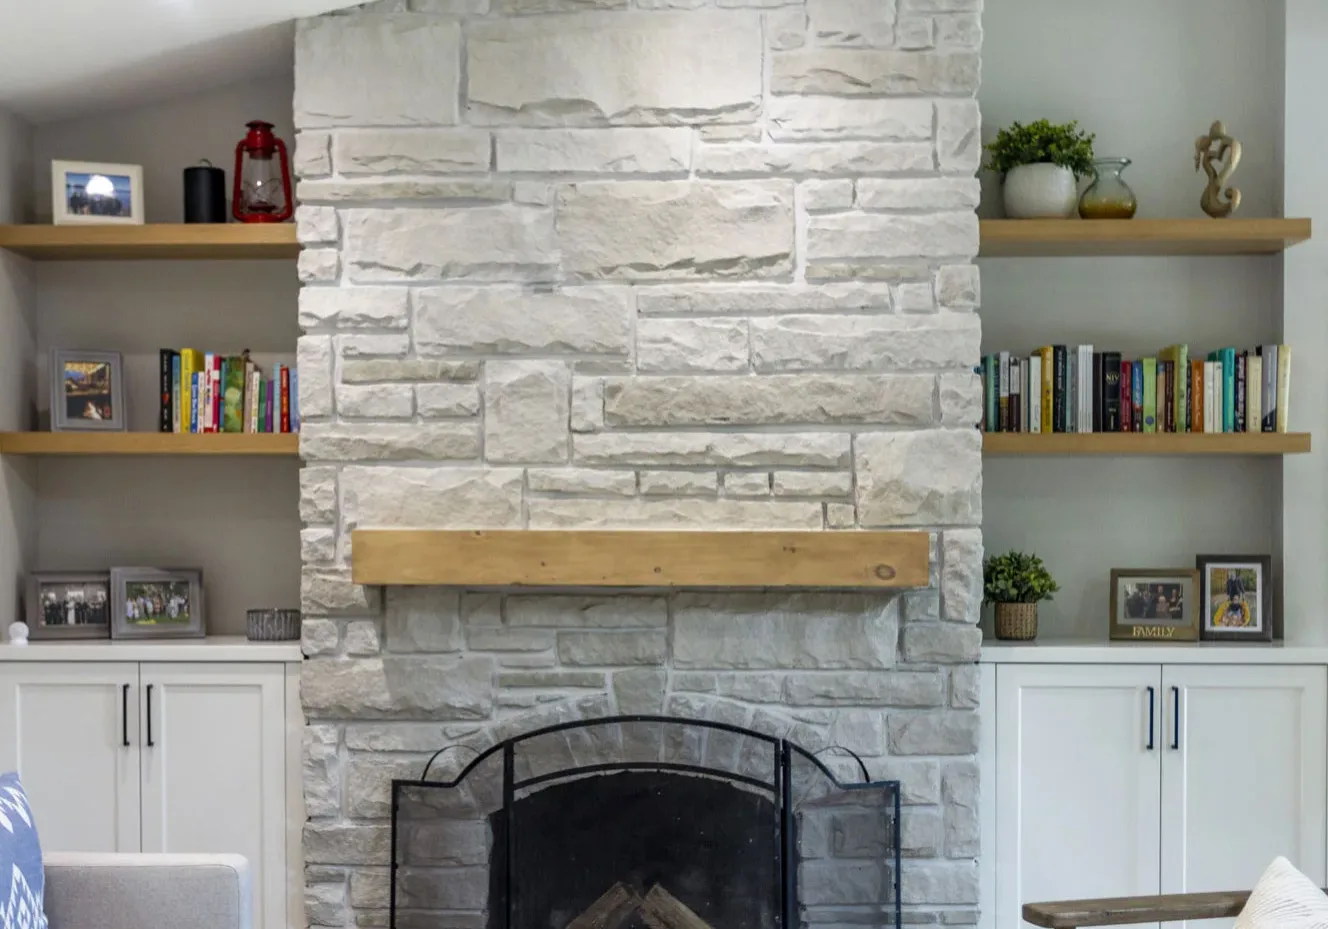 A light grey bricked fire place with a wooden fireplace with shelving on the left and right.